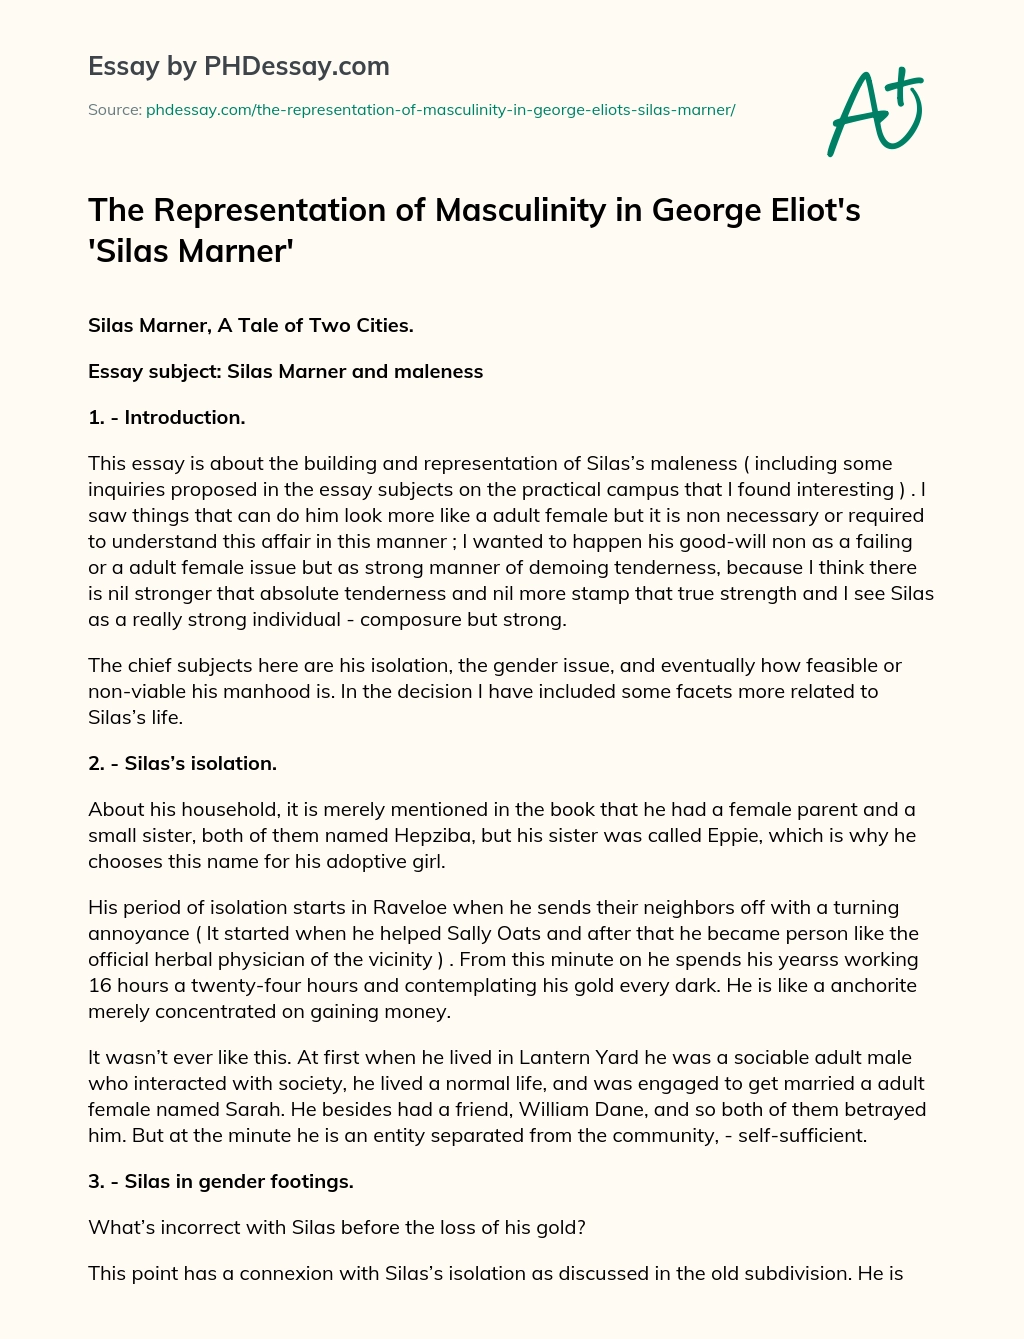 The Representation of Masculinity in George Eliot’s ‘Silas Marner’ essay